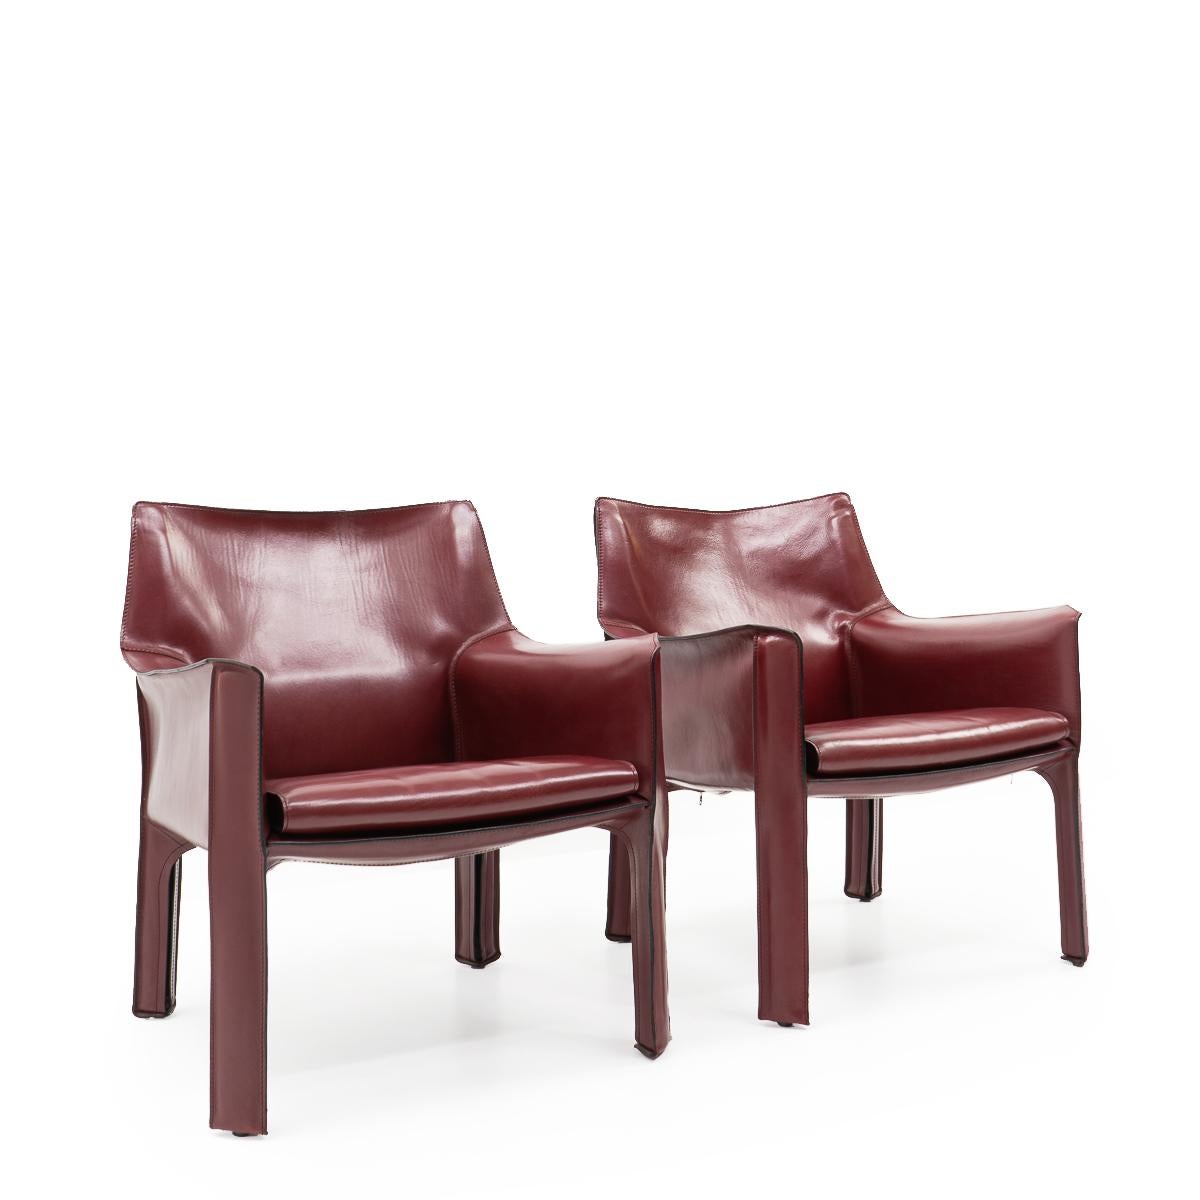 Metal Italian Design Cab 414 Armchairs by Mario Bellini for Cassina, Set of 2